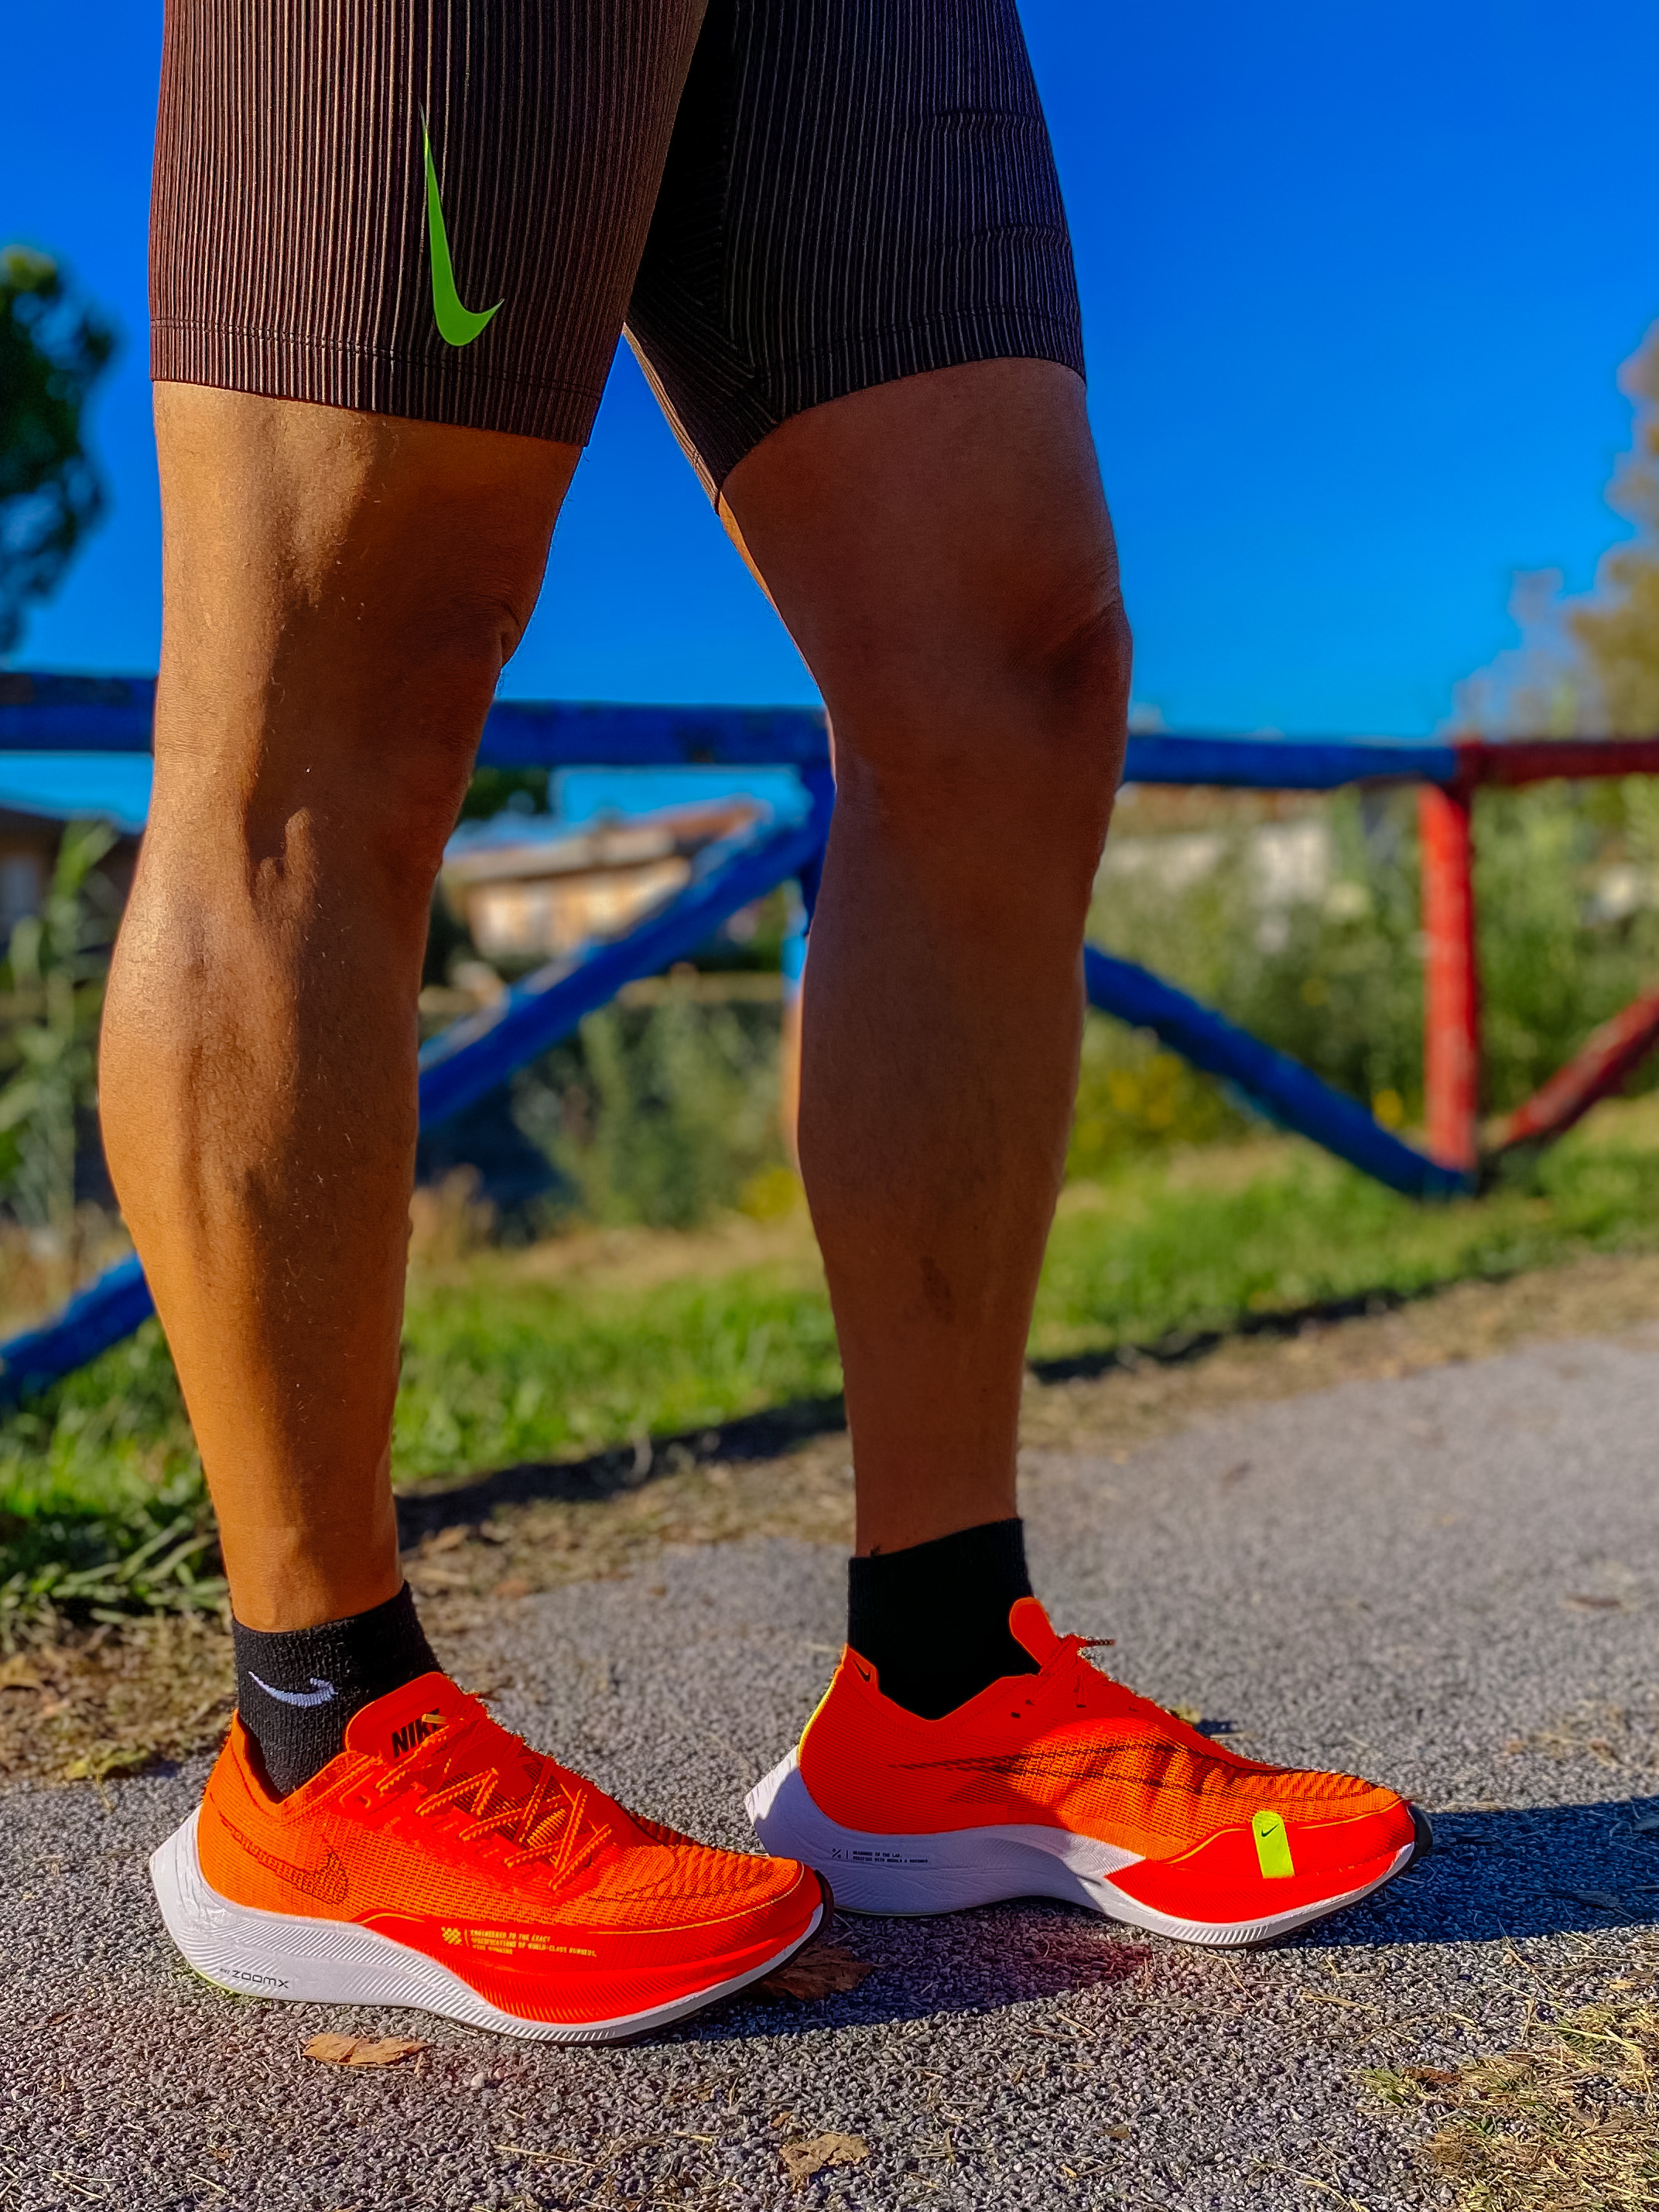 REVIEW: Nike ZoomX Vaporfly Next% 2 | SportsShoes.com